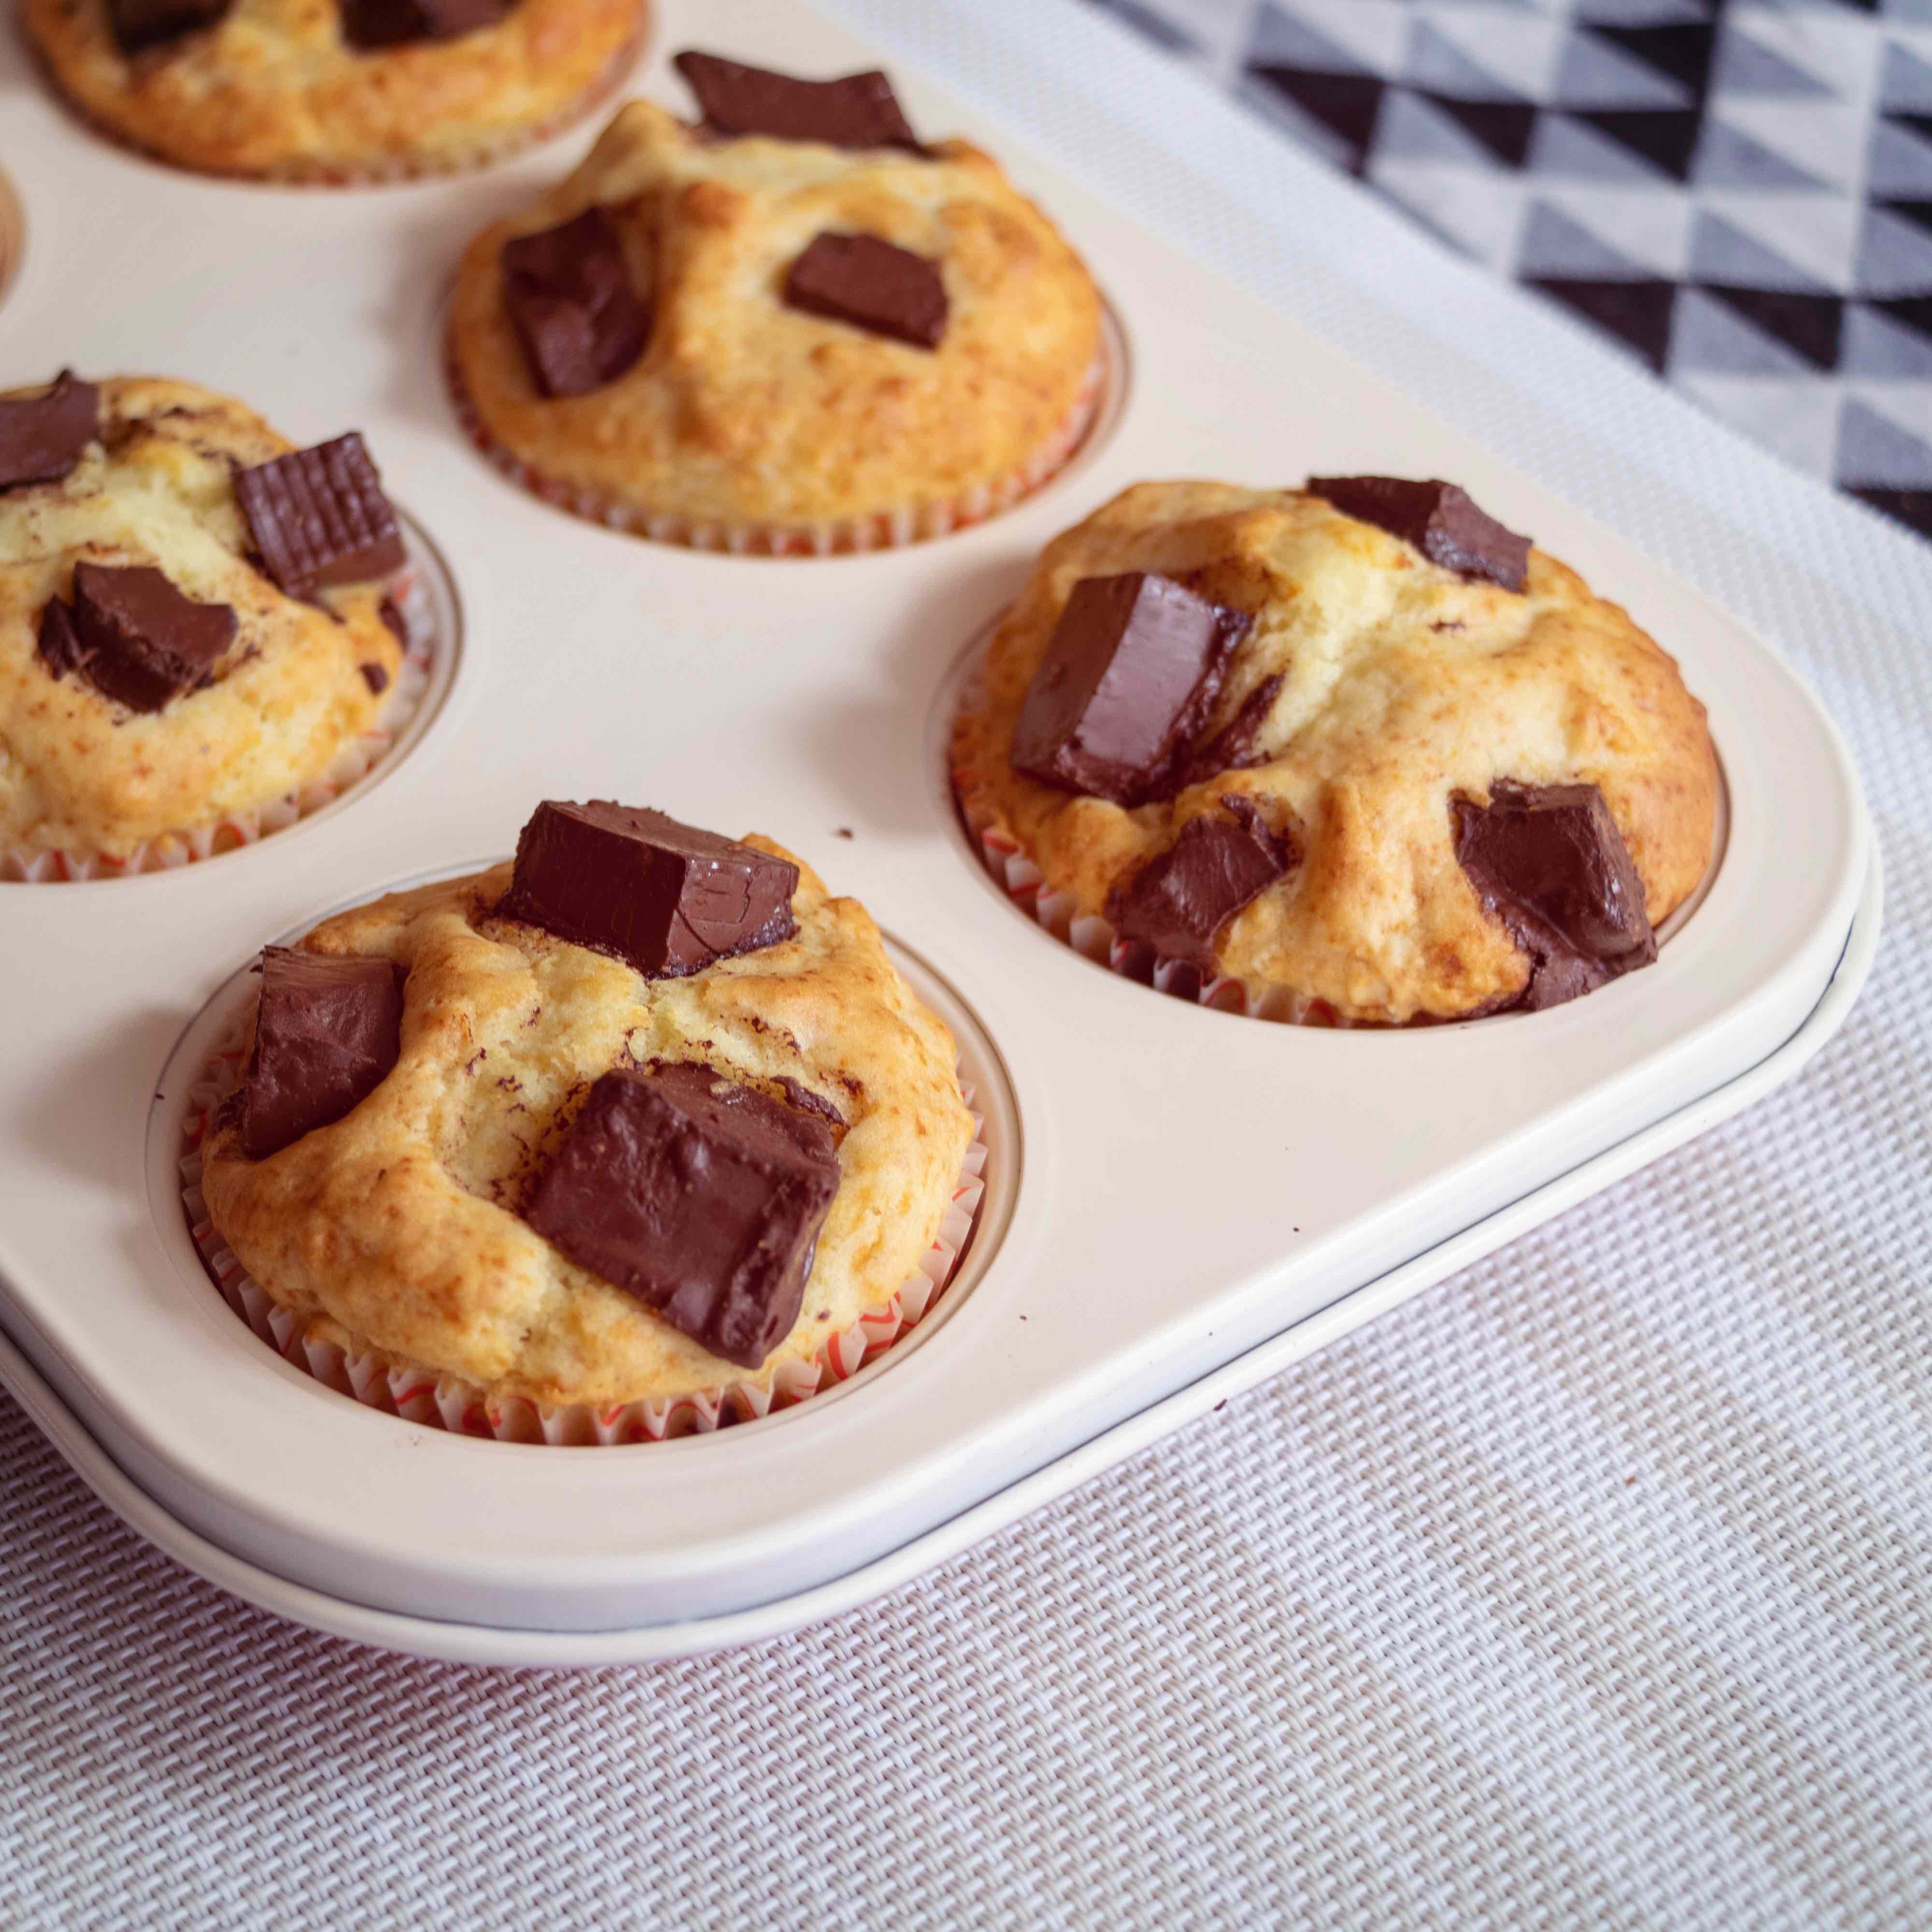 Sweet potato muffins with pieces of chocolate